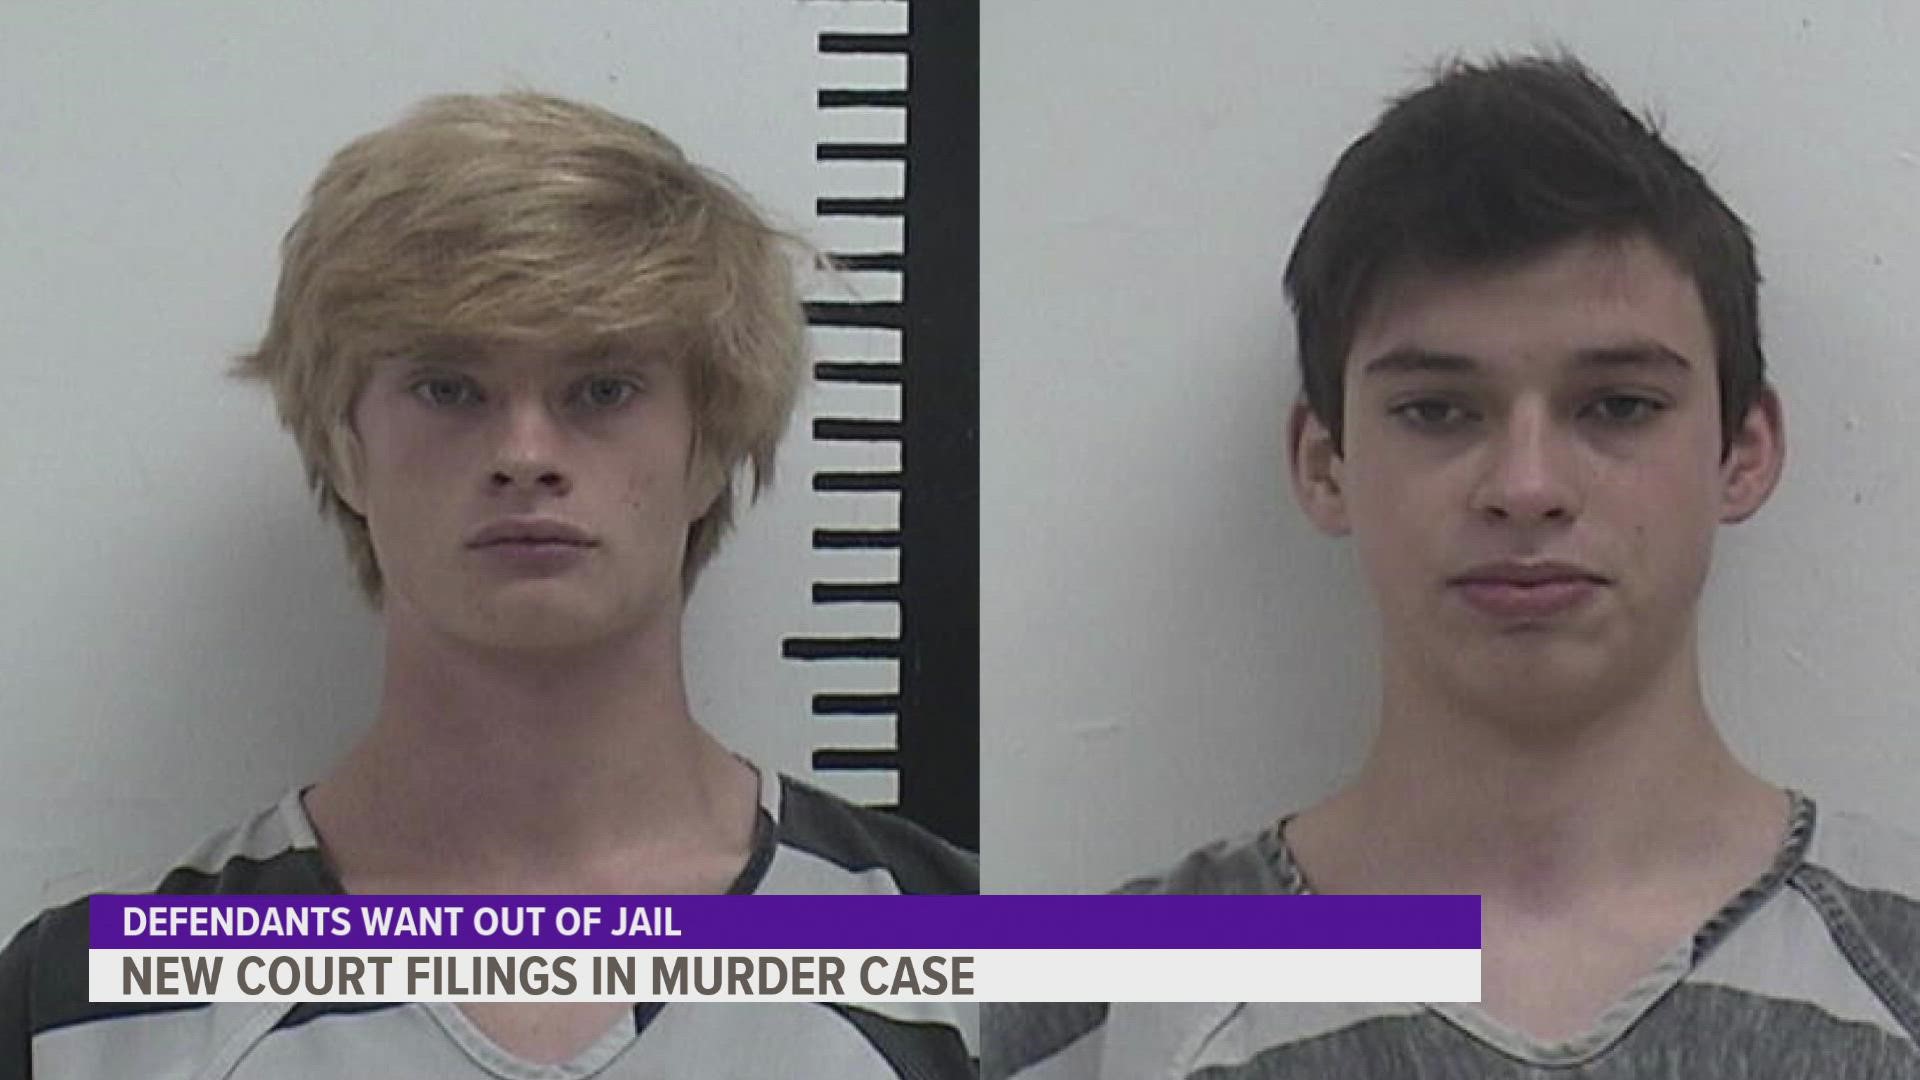 Two 16-year-olds are facing first-degree murder charges, with attorneys asking for pretrial release instead of the current $1 million cash-only bond.